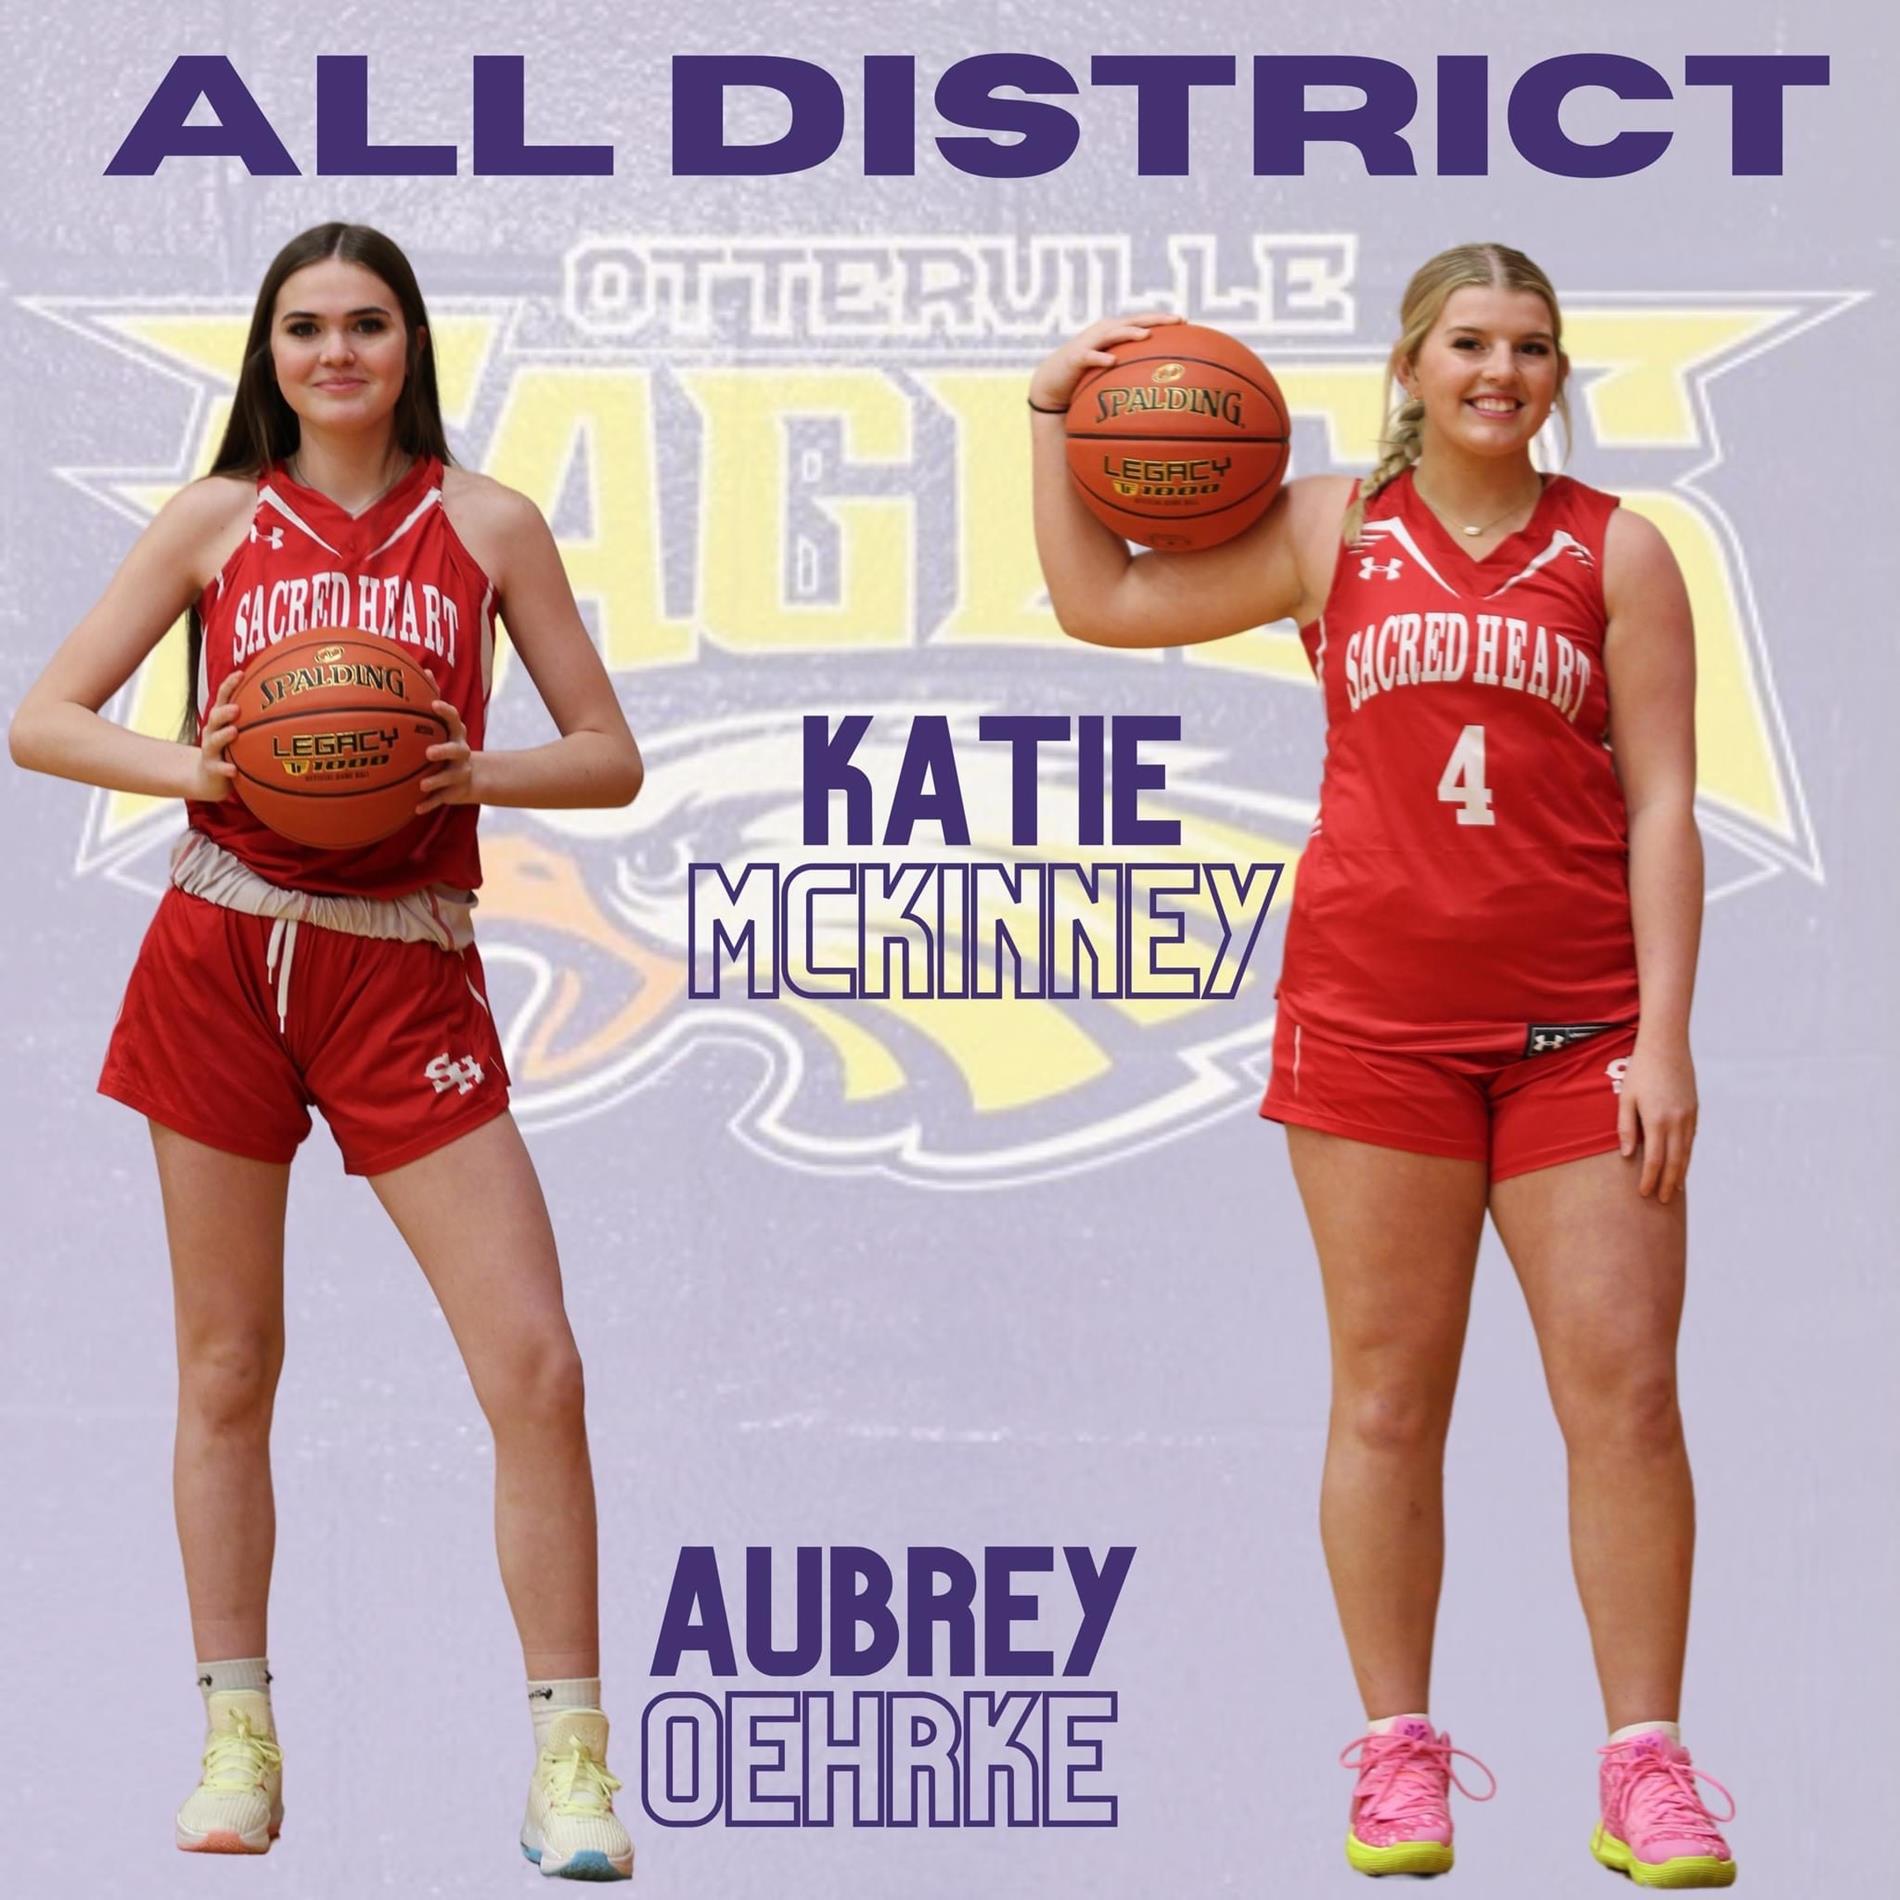 All District 